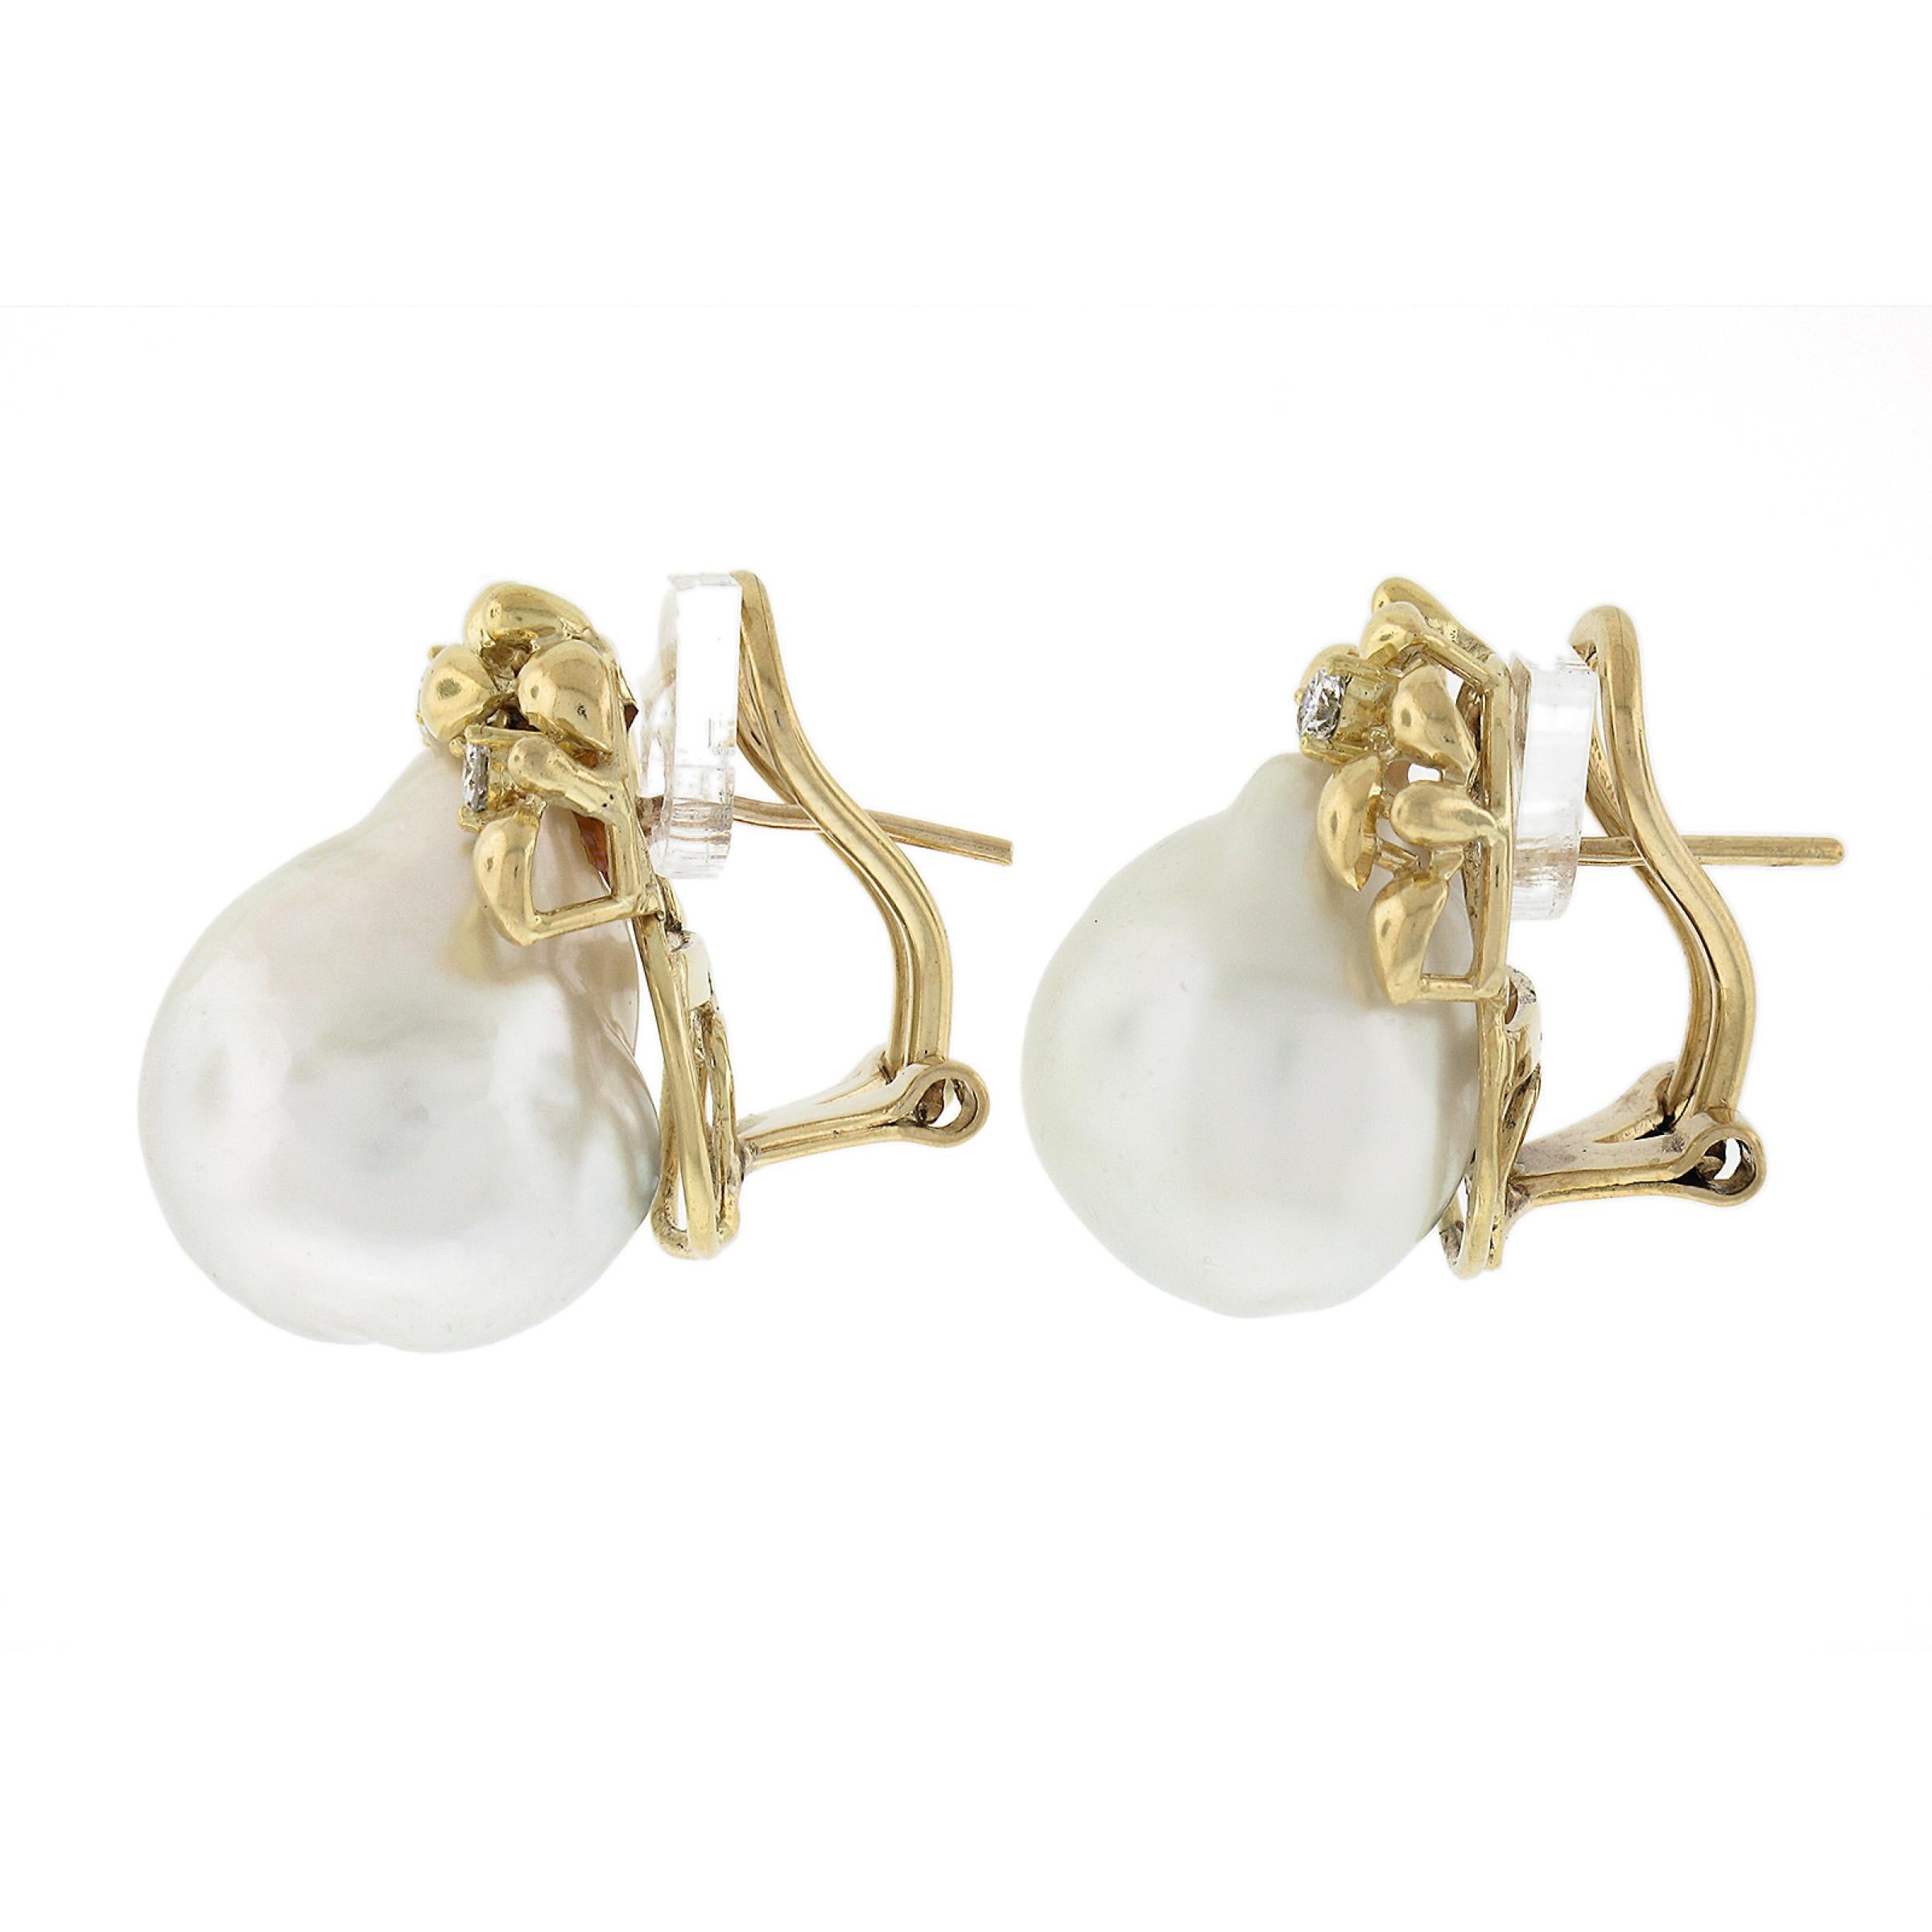 Vintage 18K Yellow Gold 14mm South Sea Pearls w/ 0.20ctw Diamonds Omega Earrings In Excellent Condition For Sale In Montclair, NJ